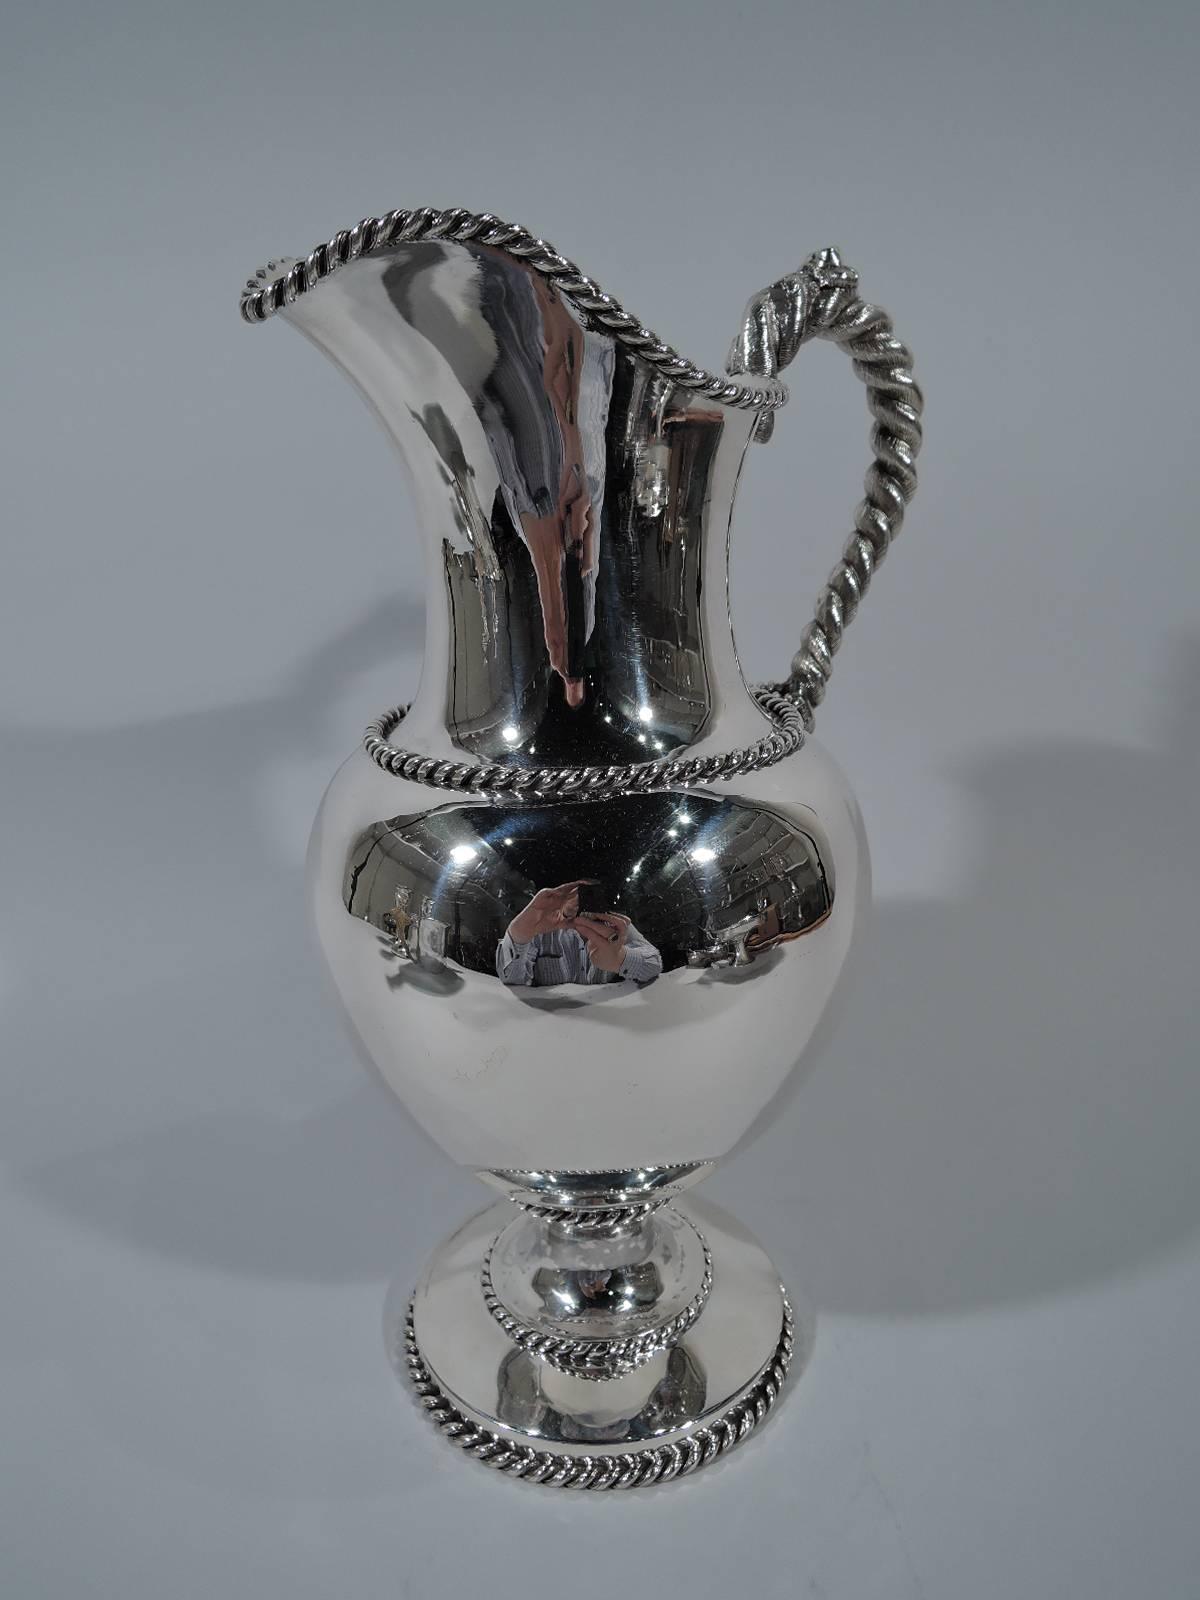 Nautical coin silver water pitcher. Made by William Gale in New York, circa 1860. Ovoid body with round stepped foot and helmet mount. Cable applied to rims, foot, and body. S-scroll handle in form of thick and coarse rope. A fine and functional